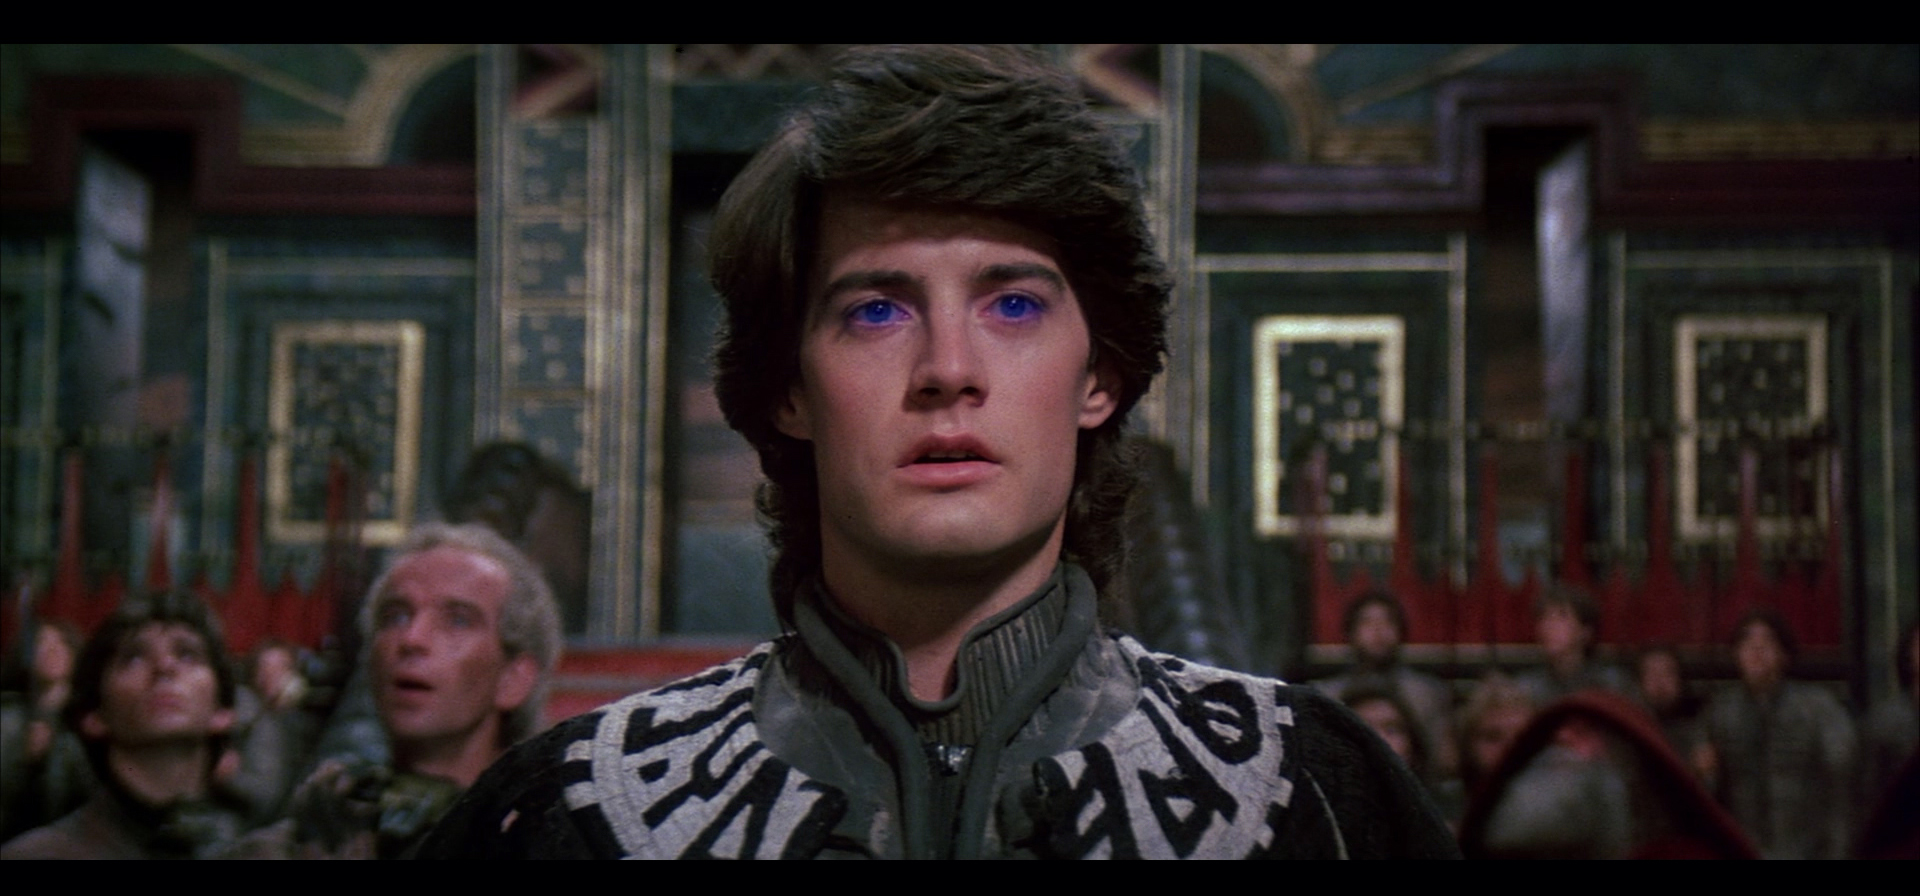 Glowing blue eyes (and terrible acting skills) are only a temporary side effect of too much template meta-programming.